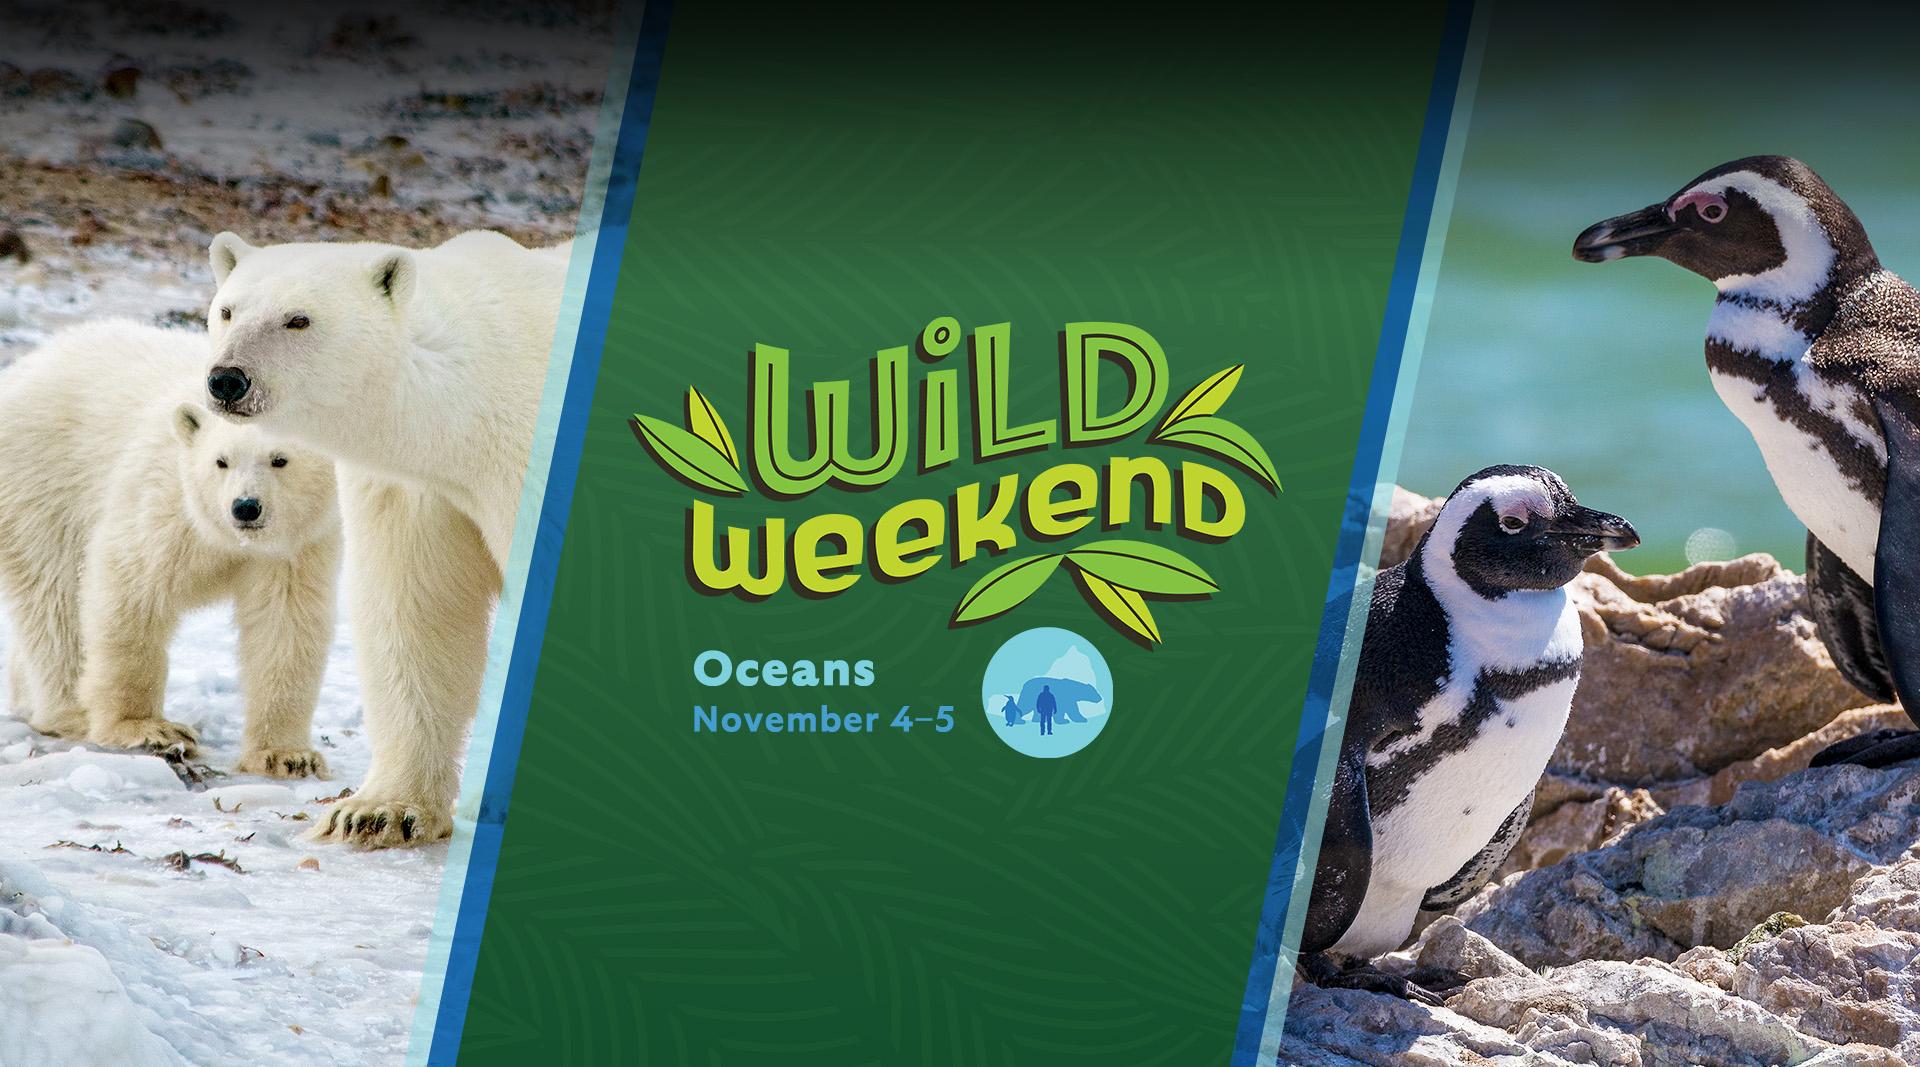 Banner with photos of polar bear, penguins and wild weekends logo